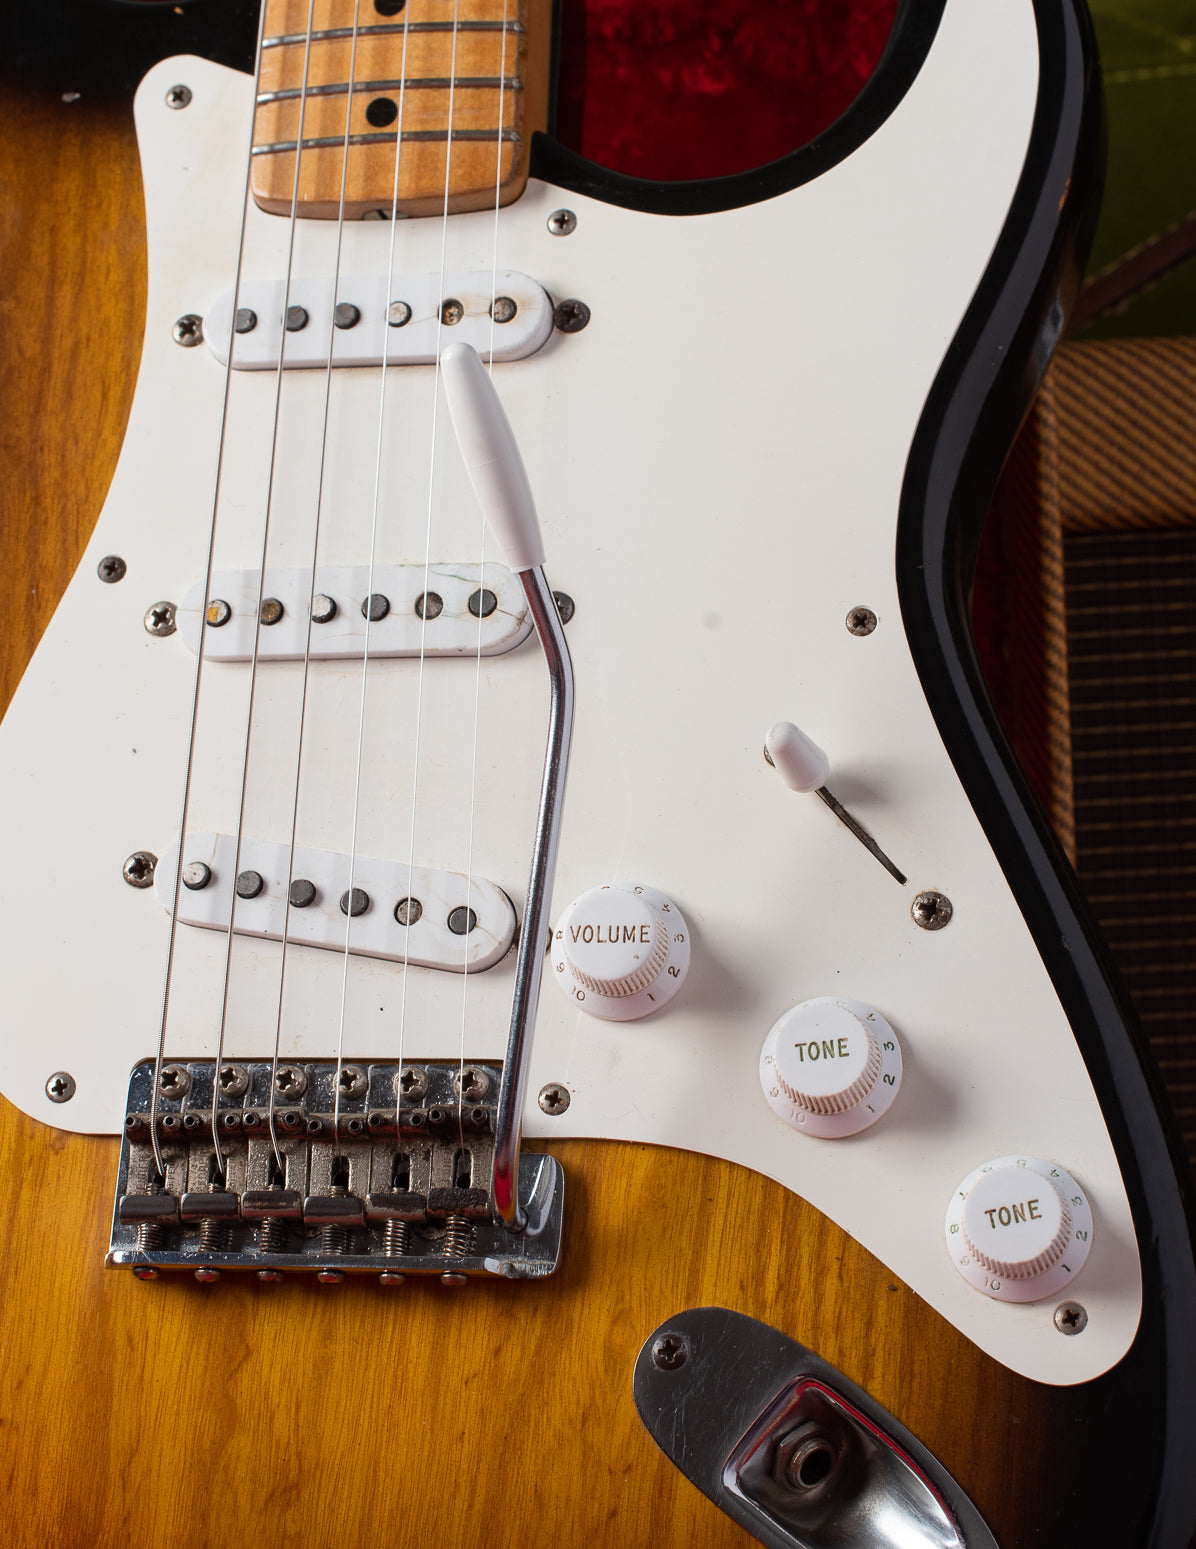 Pickguard and knobs on Fender Stratocaster 1954